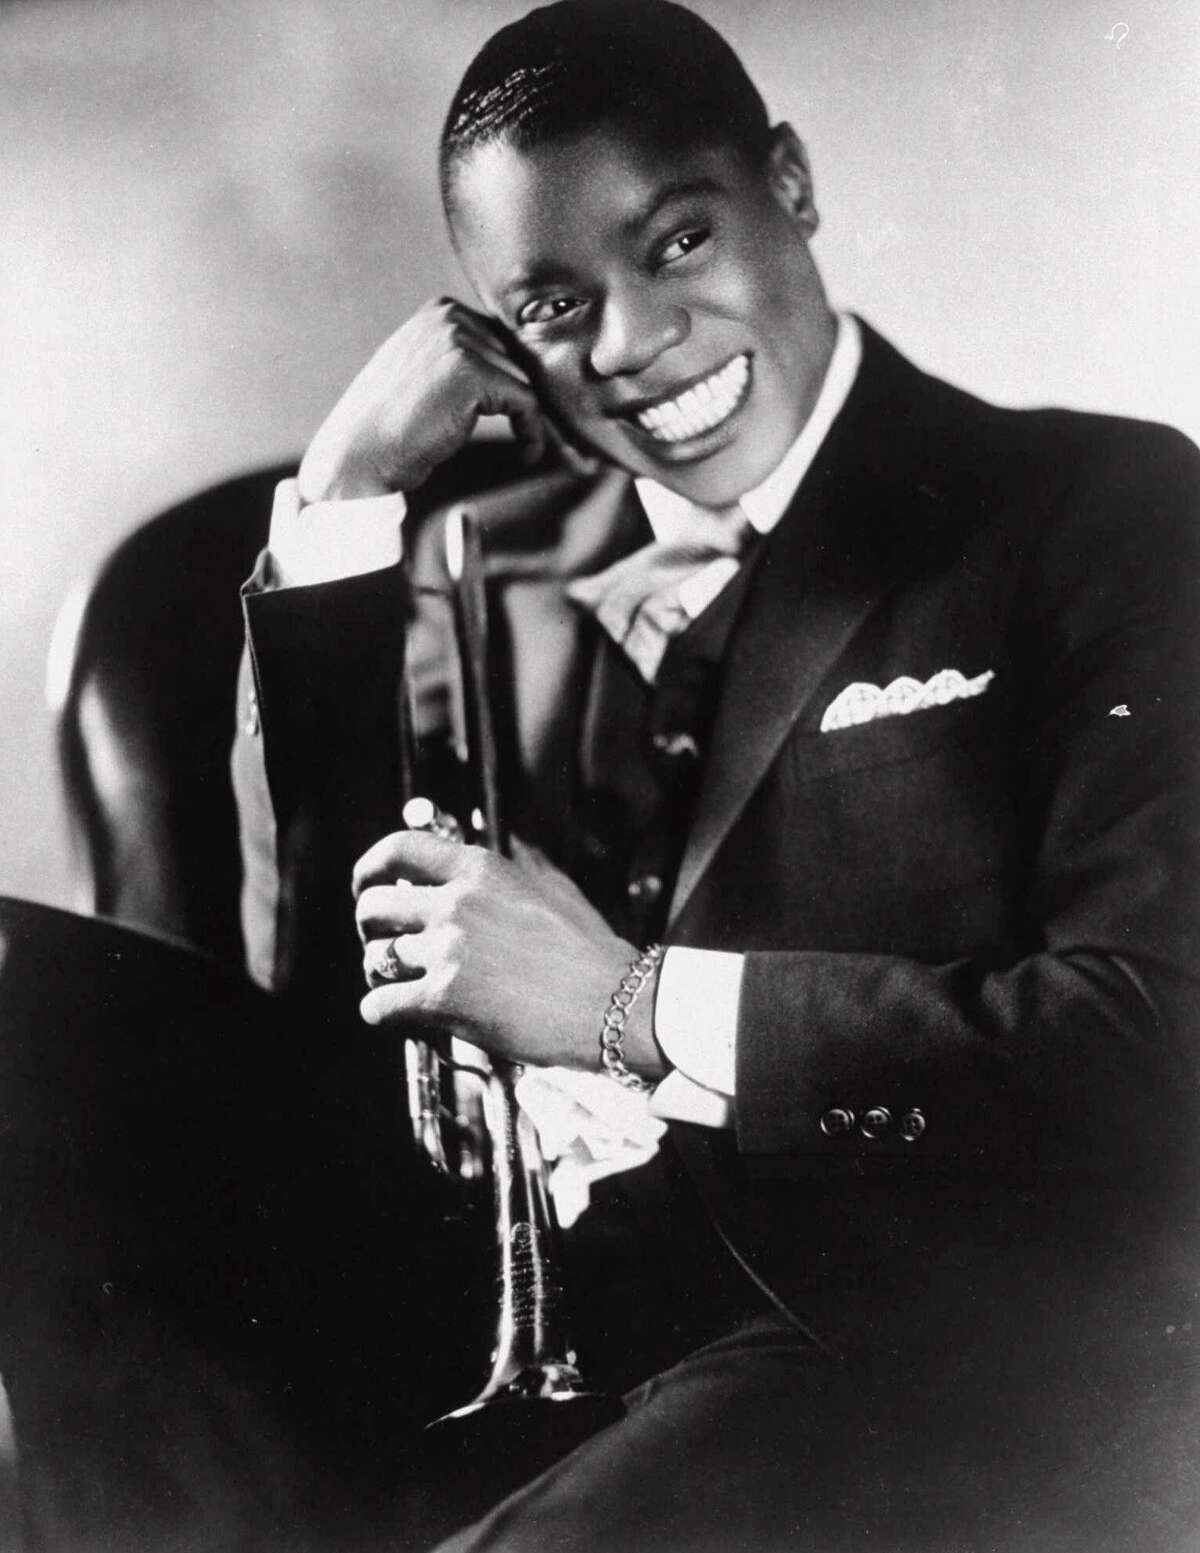 Louis Armstrong displays his broad smile in this 1932 file photo, made in Chicago to promote his first European tour. Armstrong’s early career will be the subject of a talk at Wilton Library on Sunday, Feb. 9.